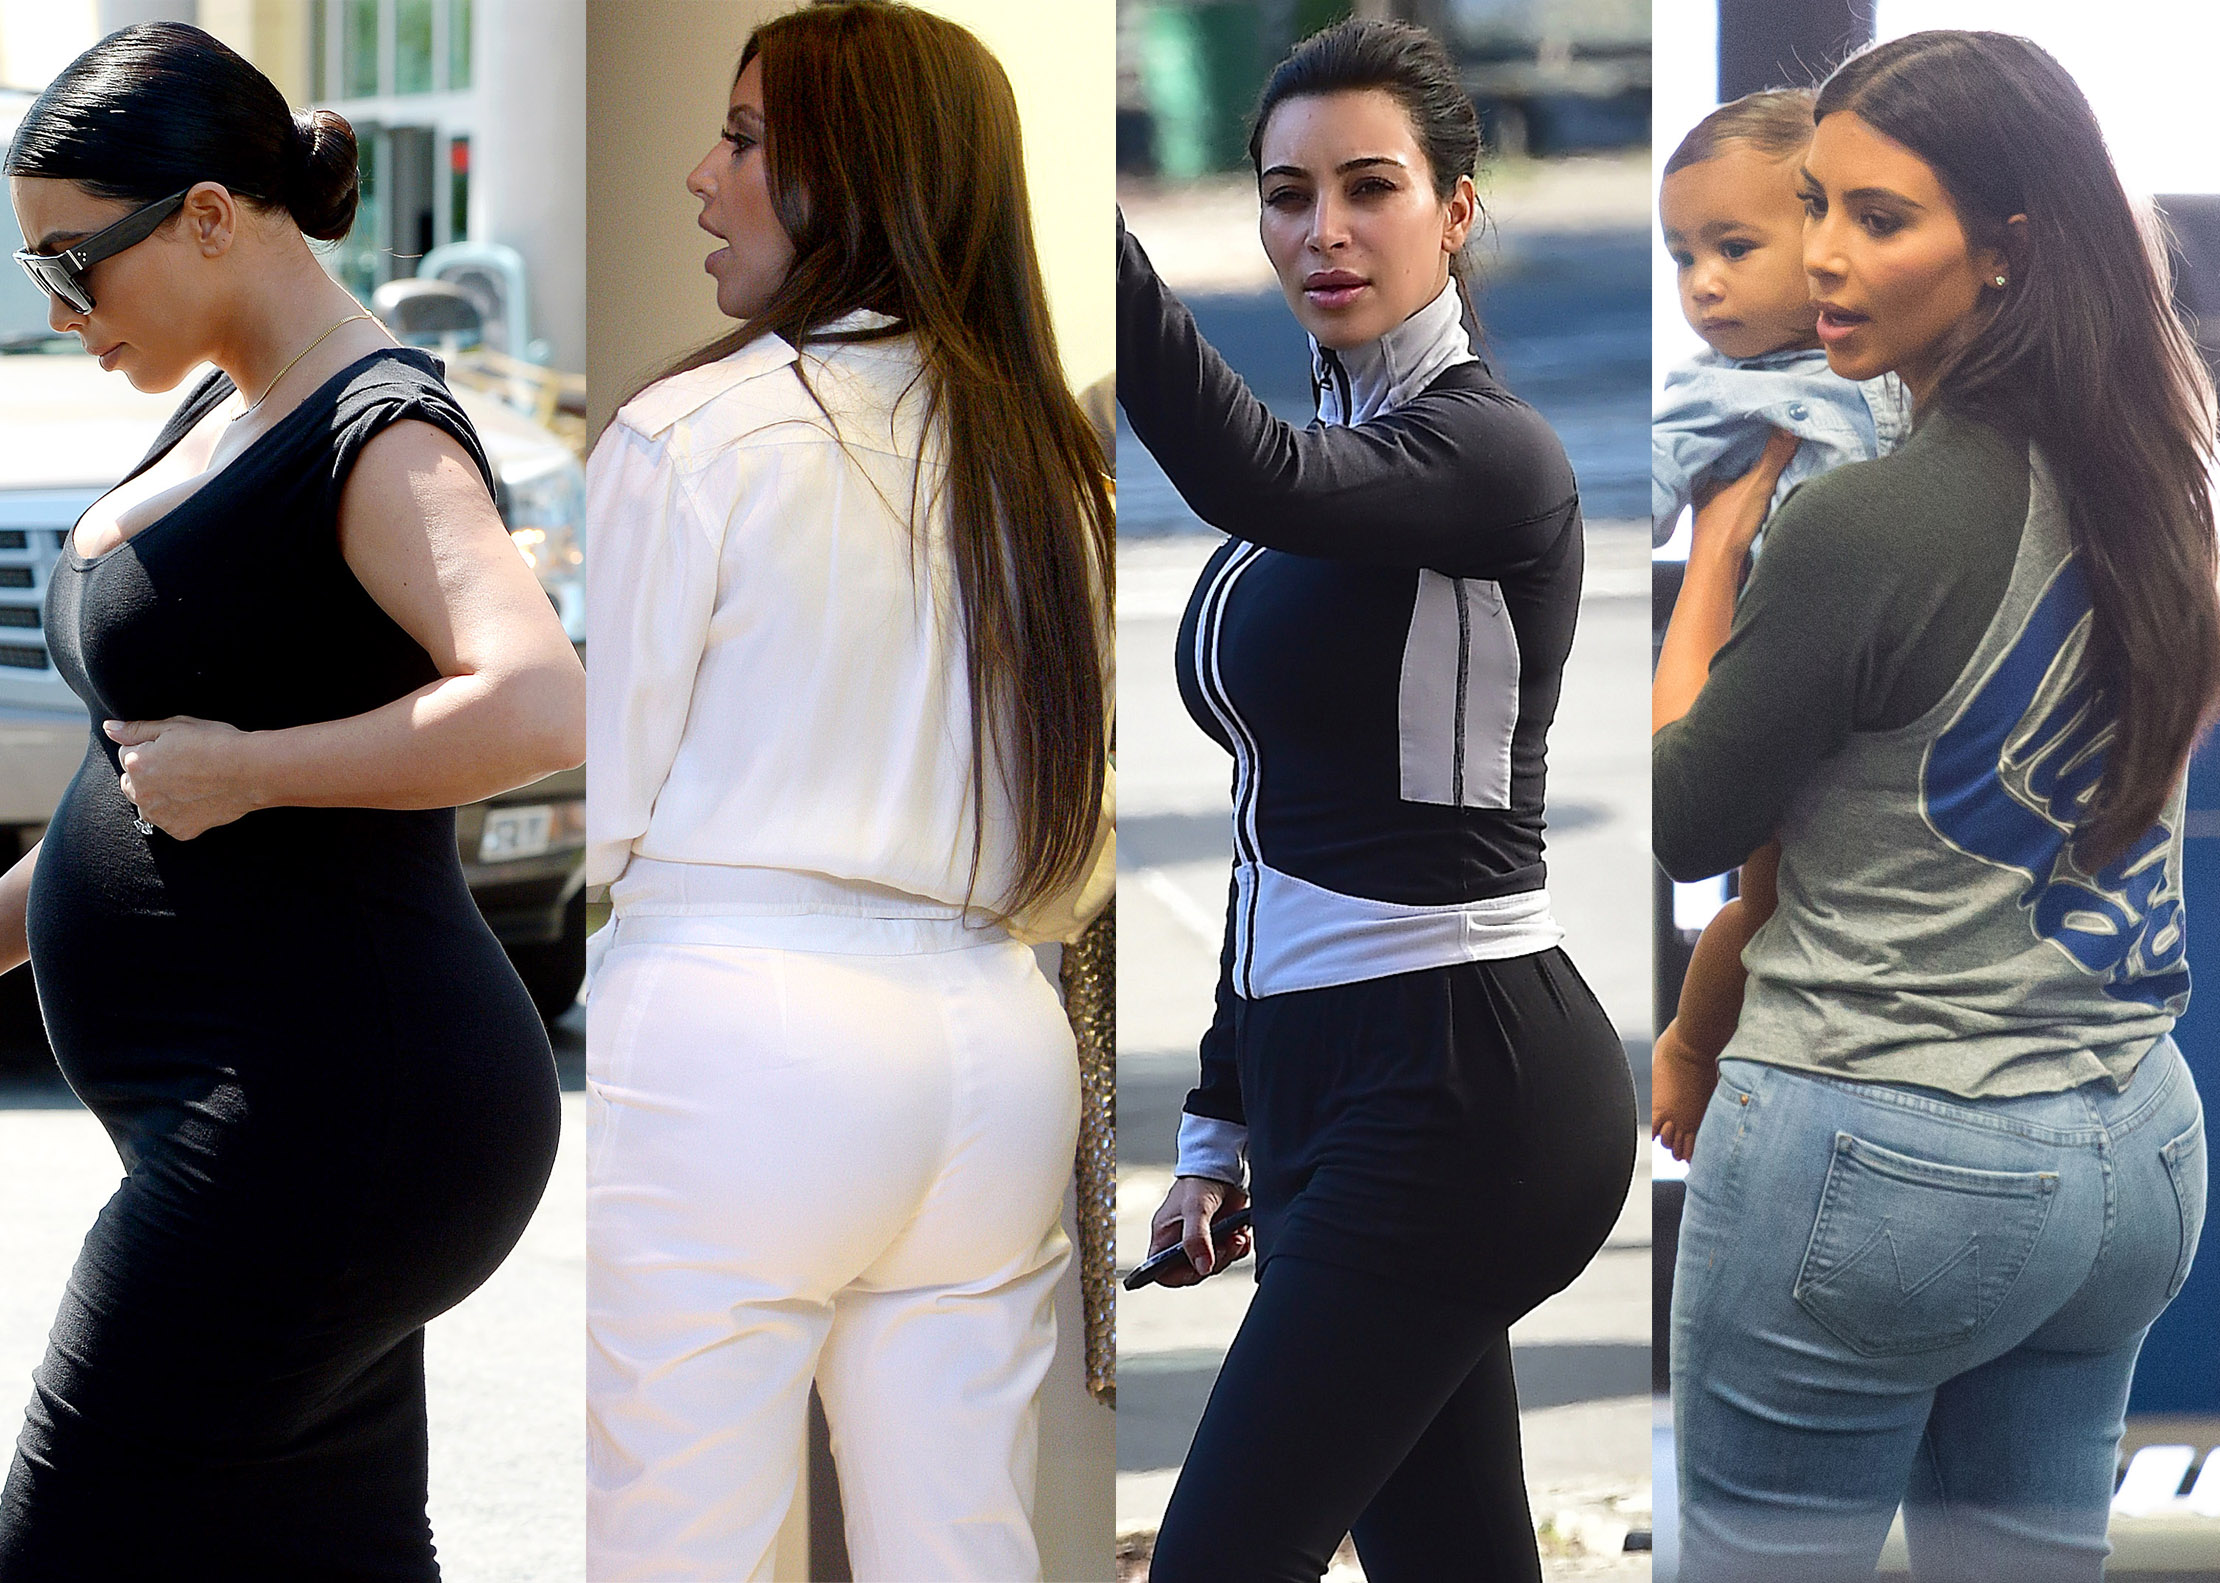 Kardashian Butts See the Famous Family With Kims Iconic Booty picture photo photo